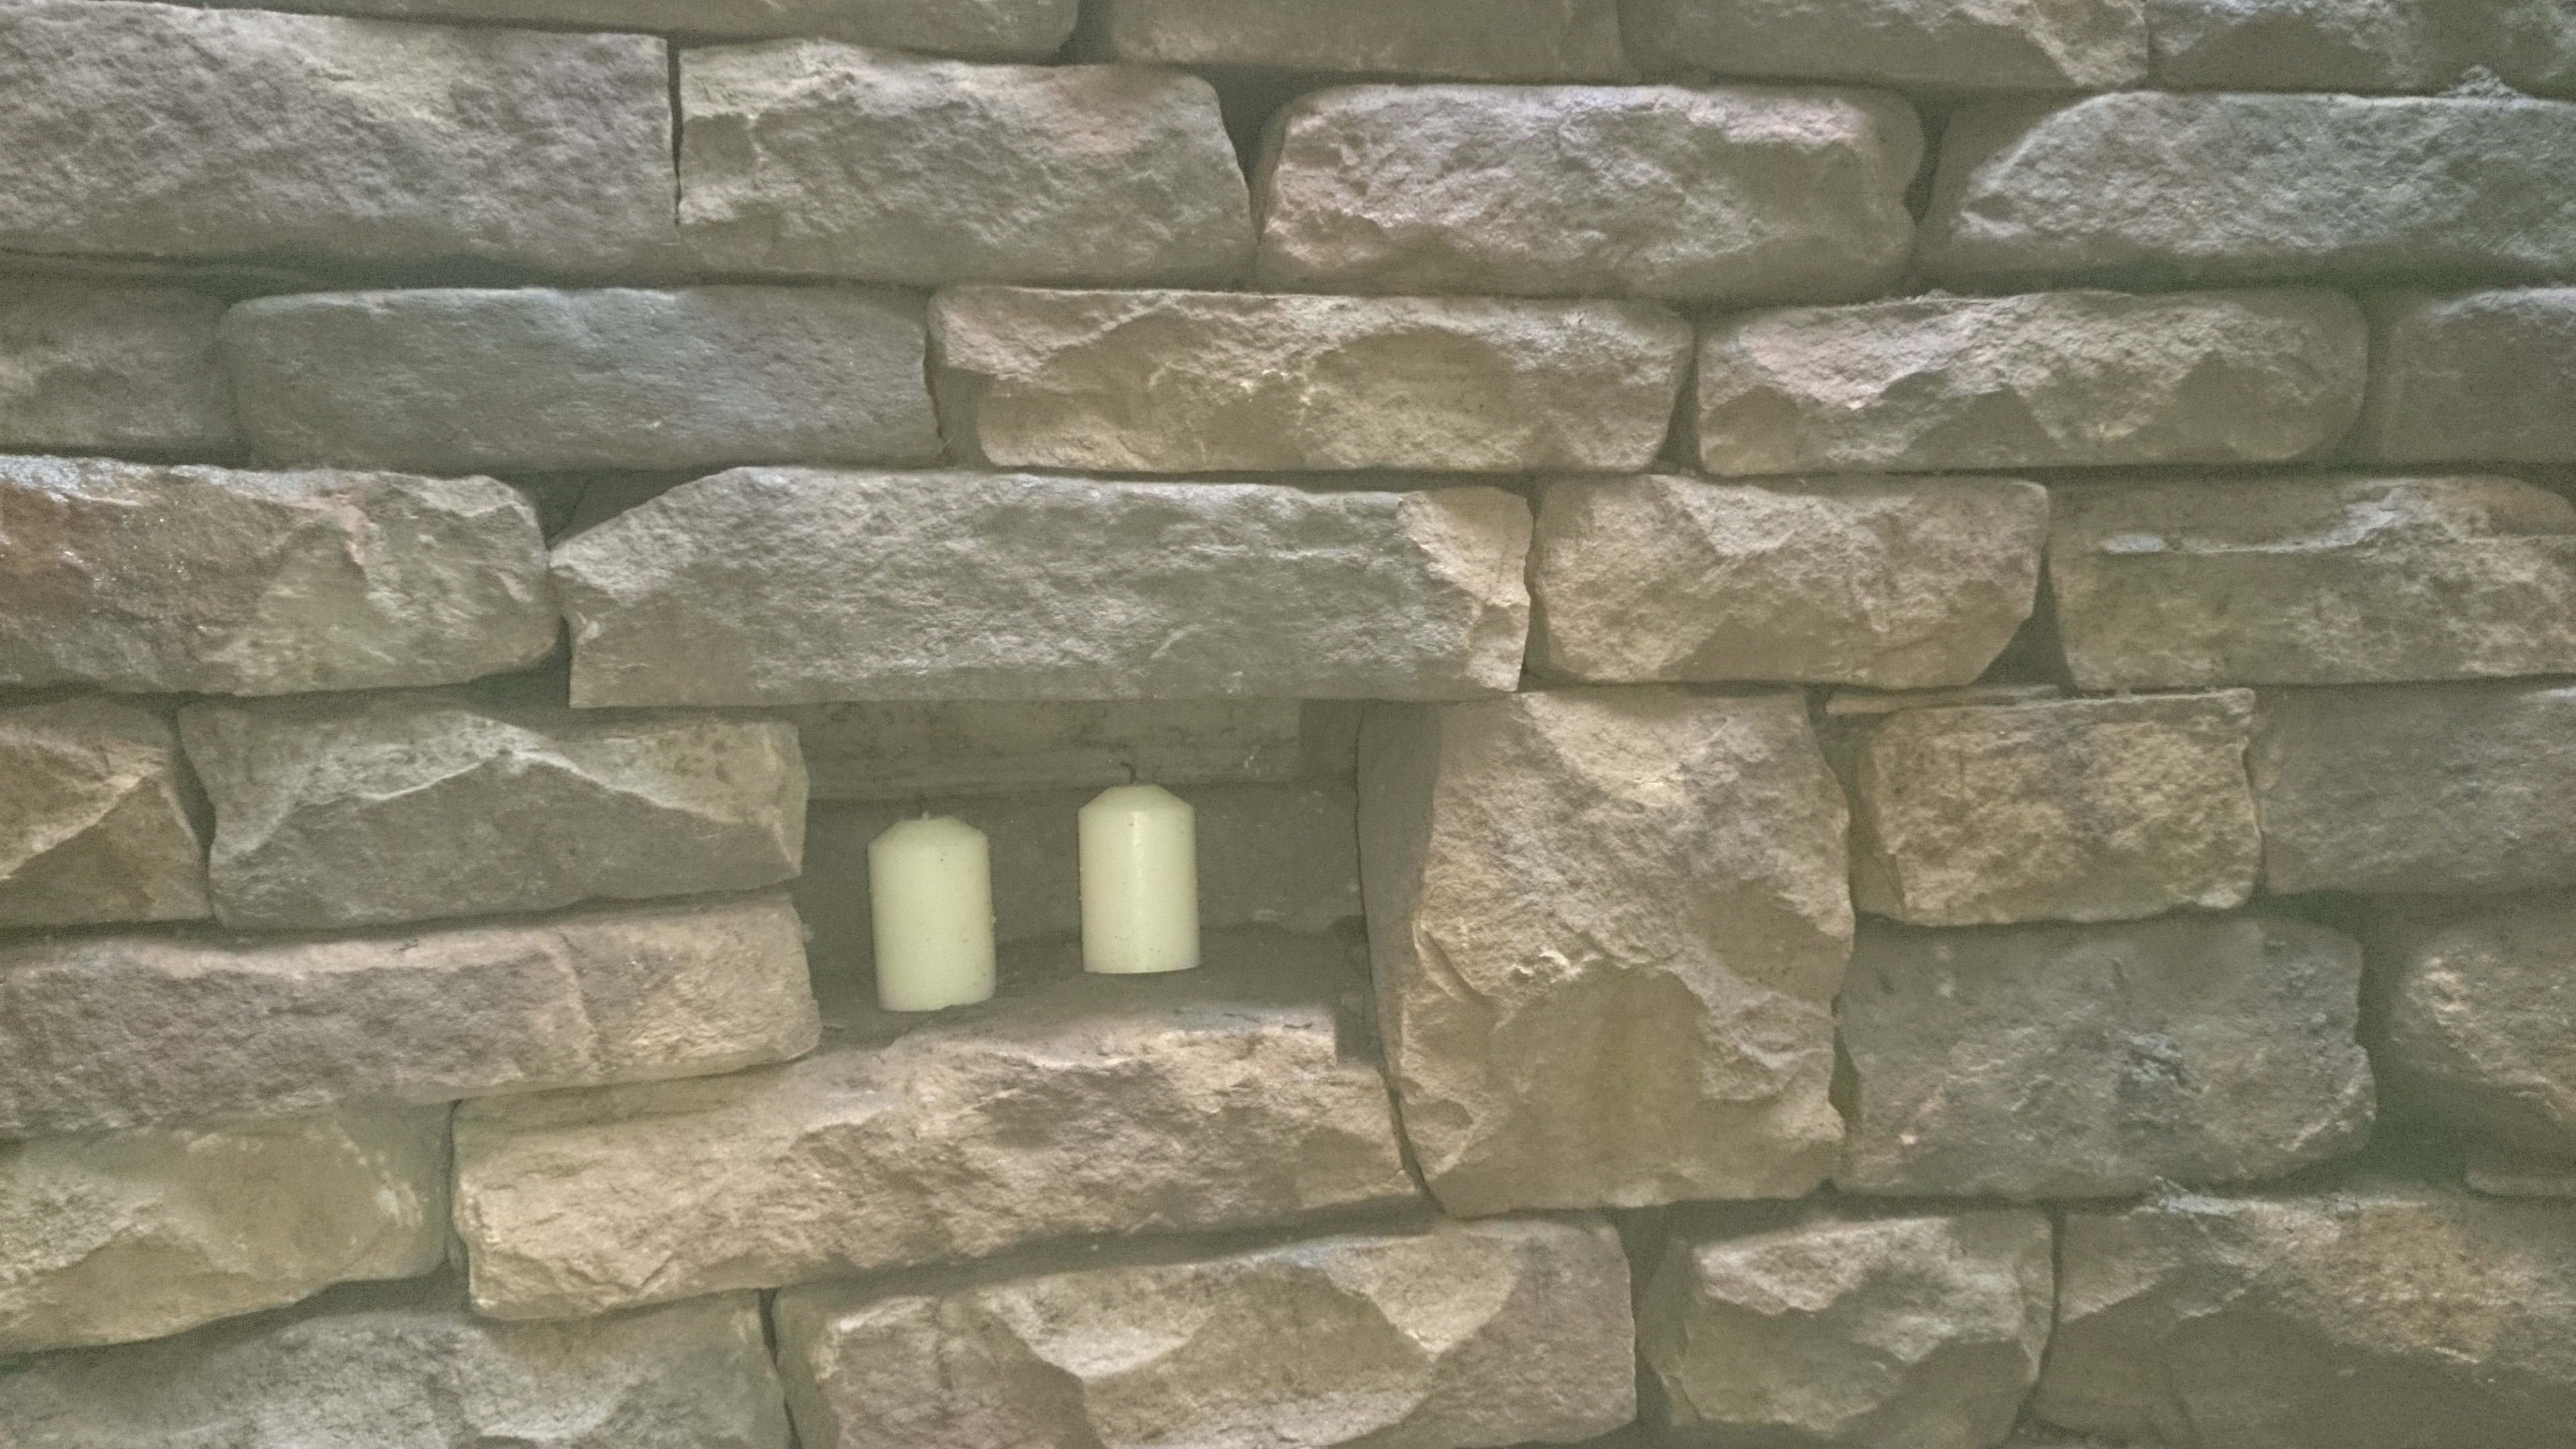 Dry stone retaining wall and candles